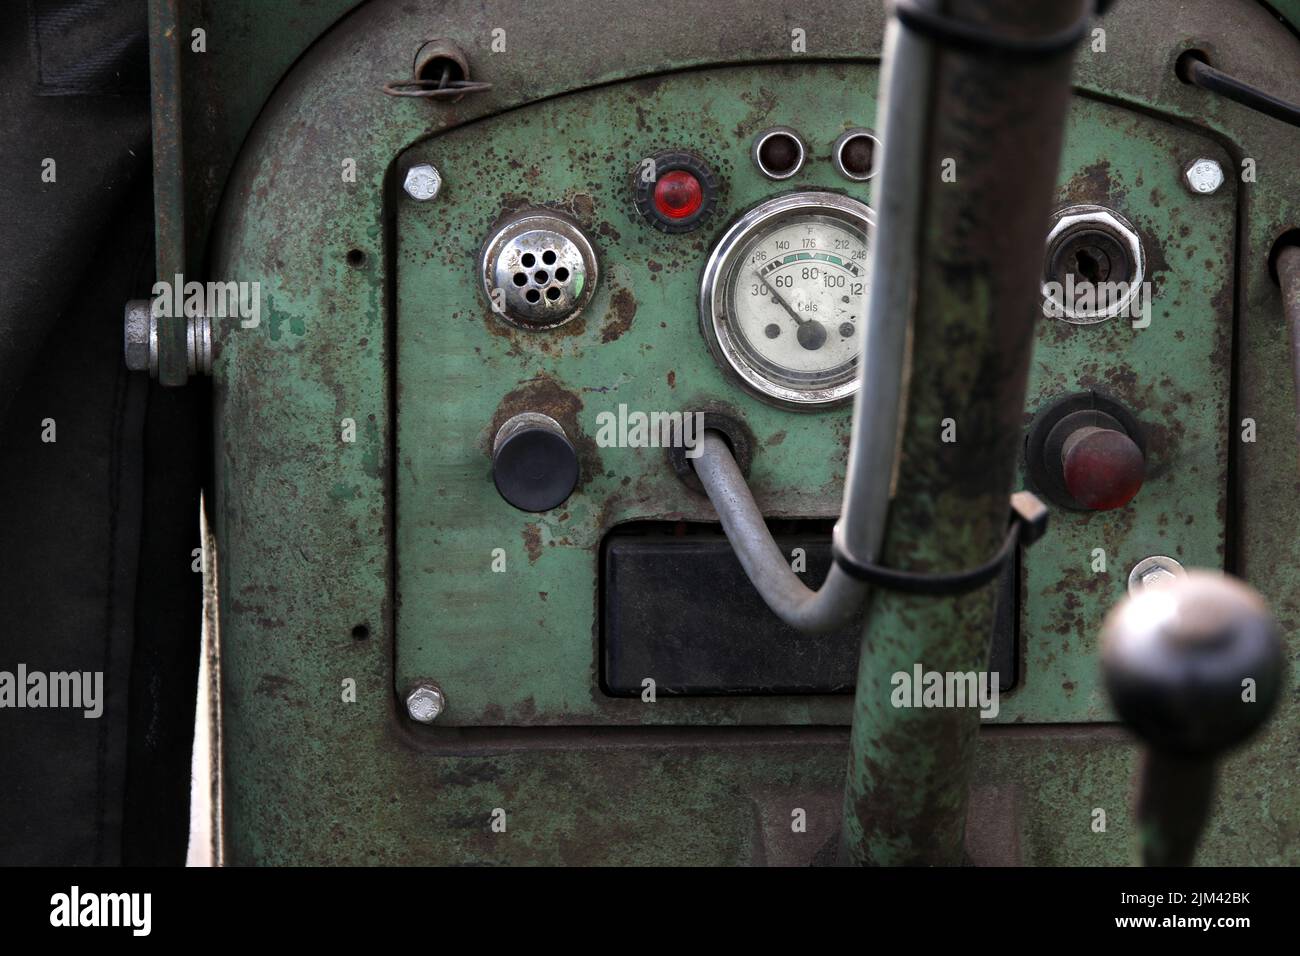 lanz was a tractor brand from germanyhere is a close-up of the dashboard with switches and display Stock Photo